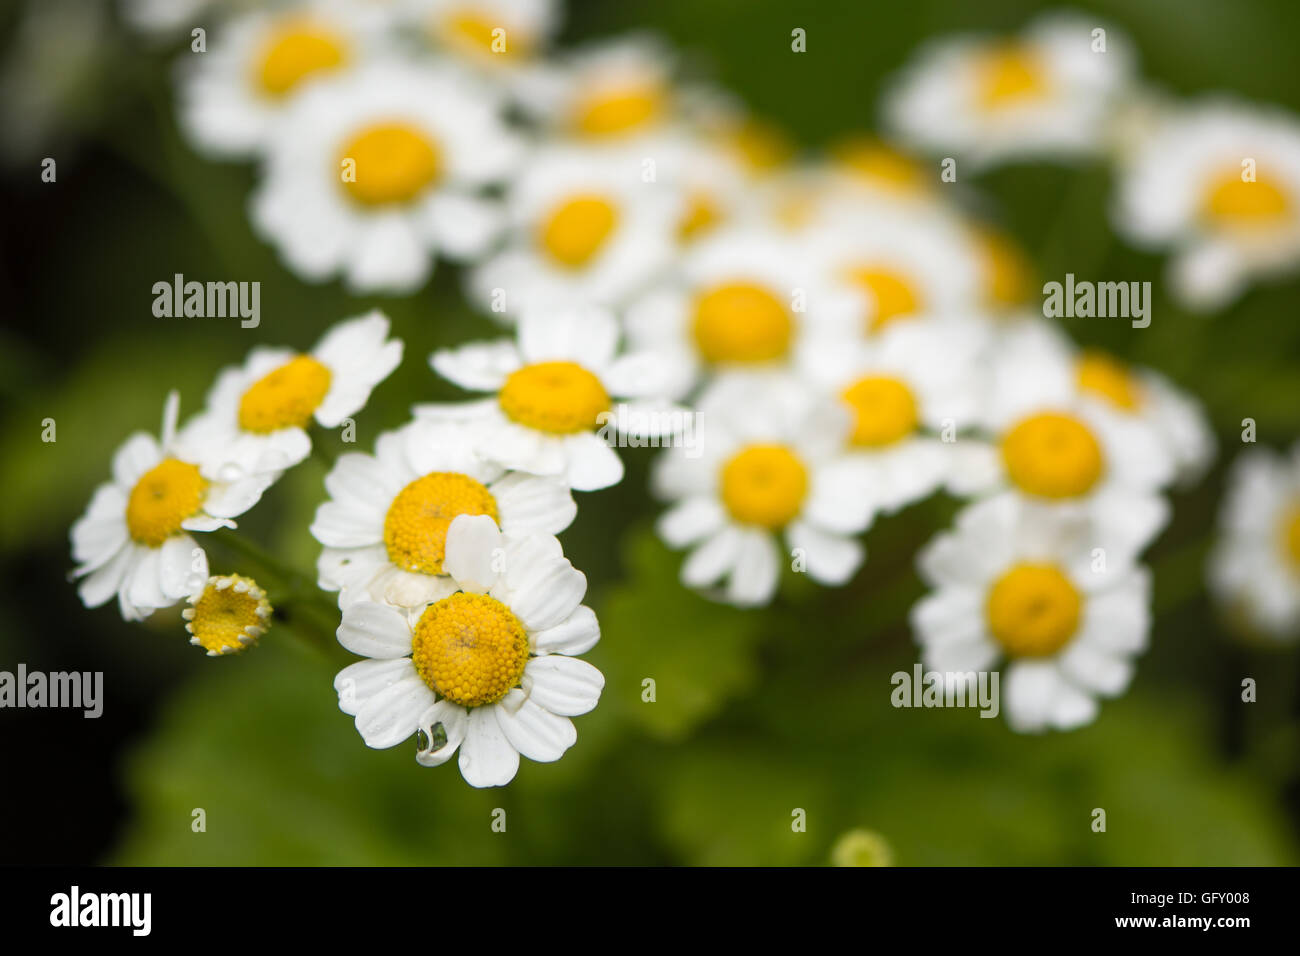 Feverfew (Tanacetum parthenium). Mass of white and yellows flowers of traditional medicinal herb in daisy family (Asteraceae) Stock Photo